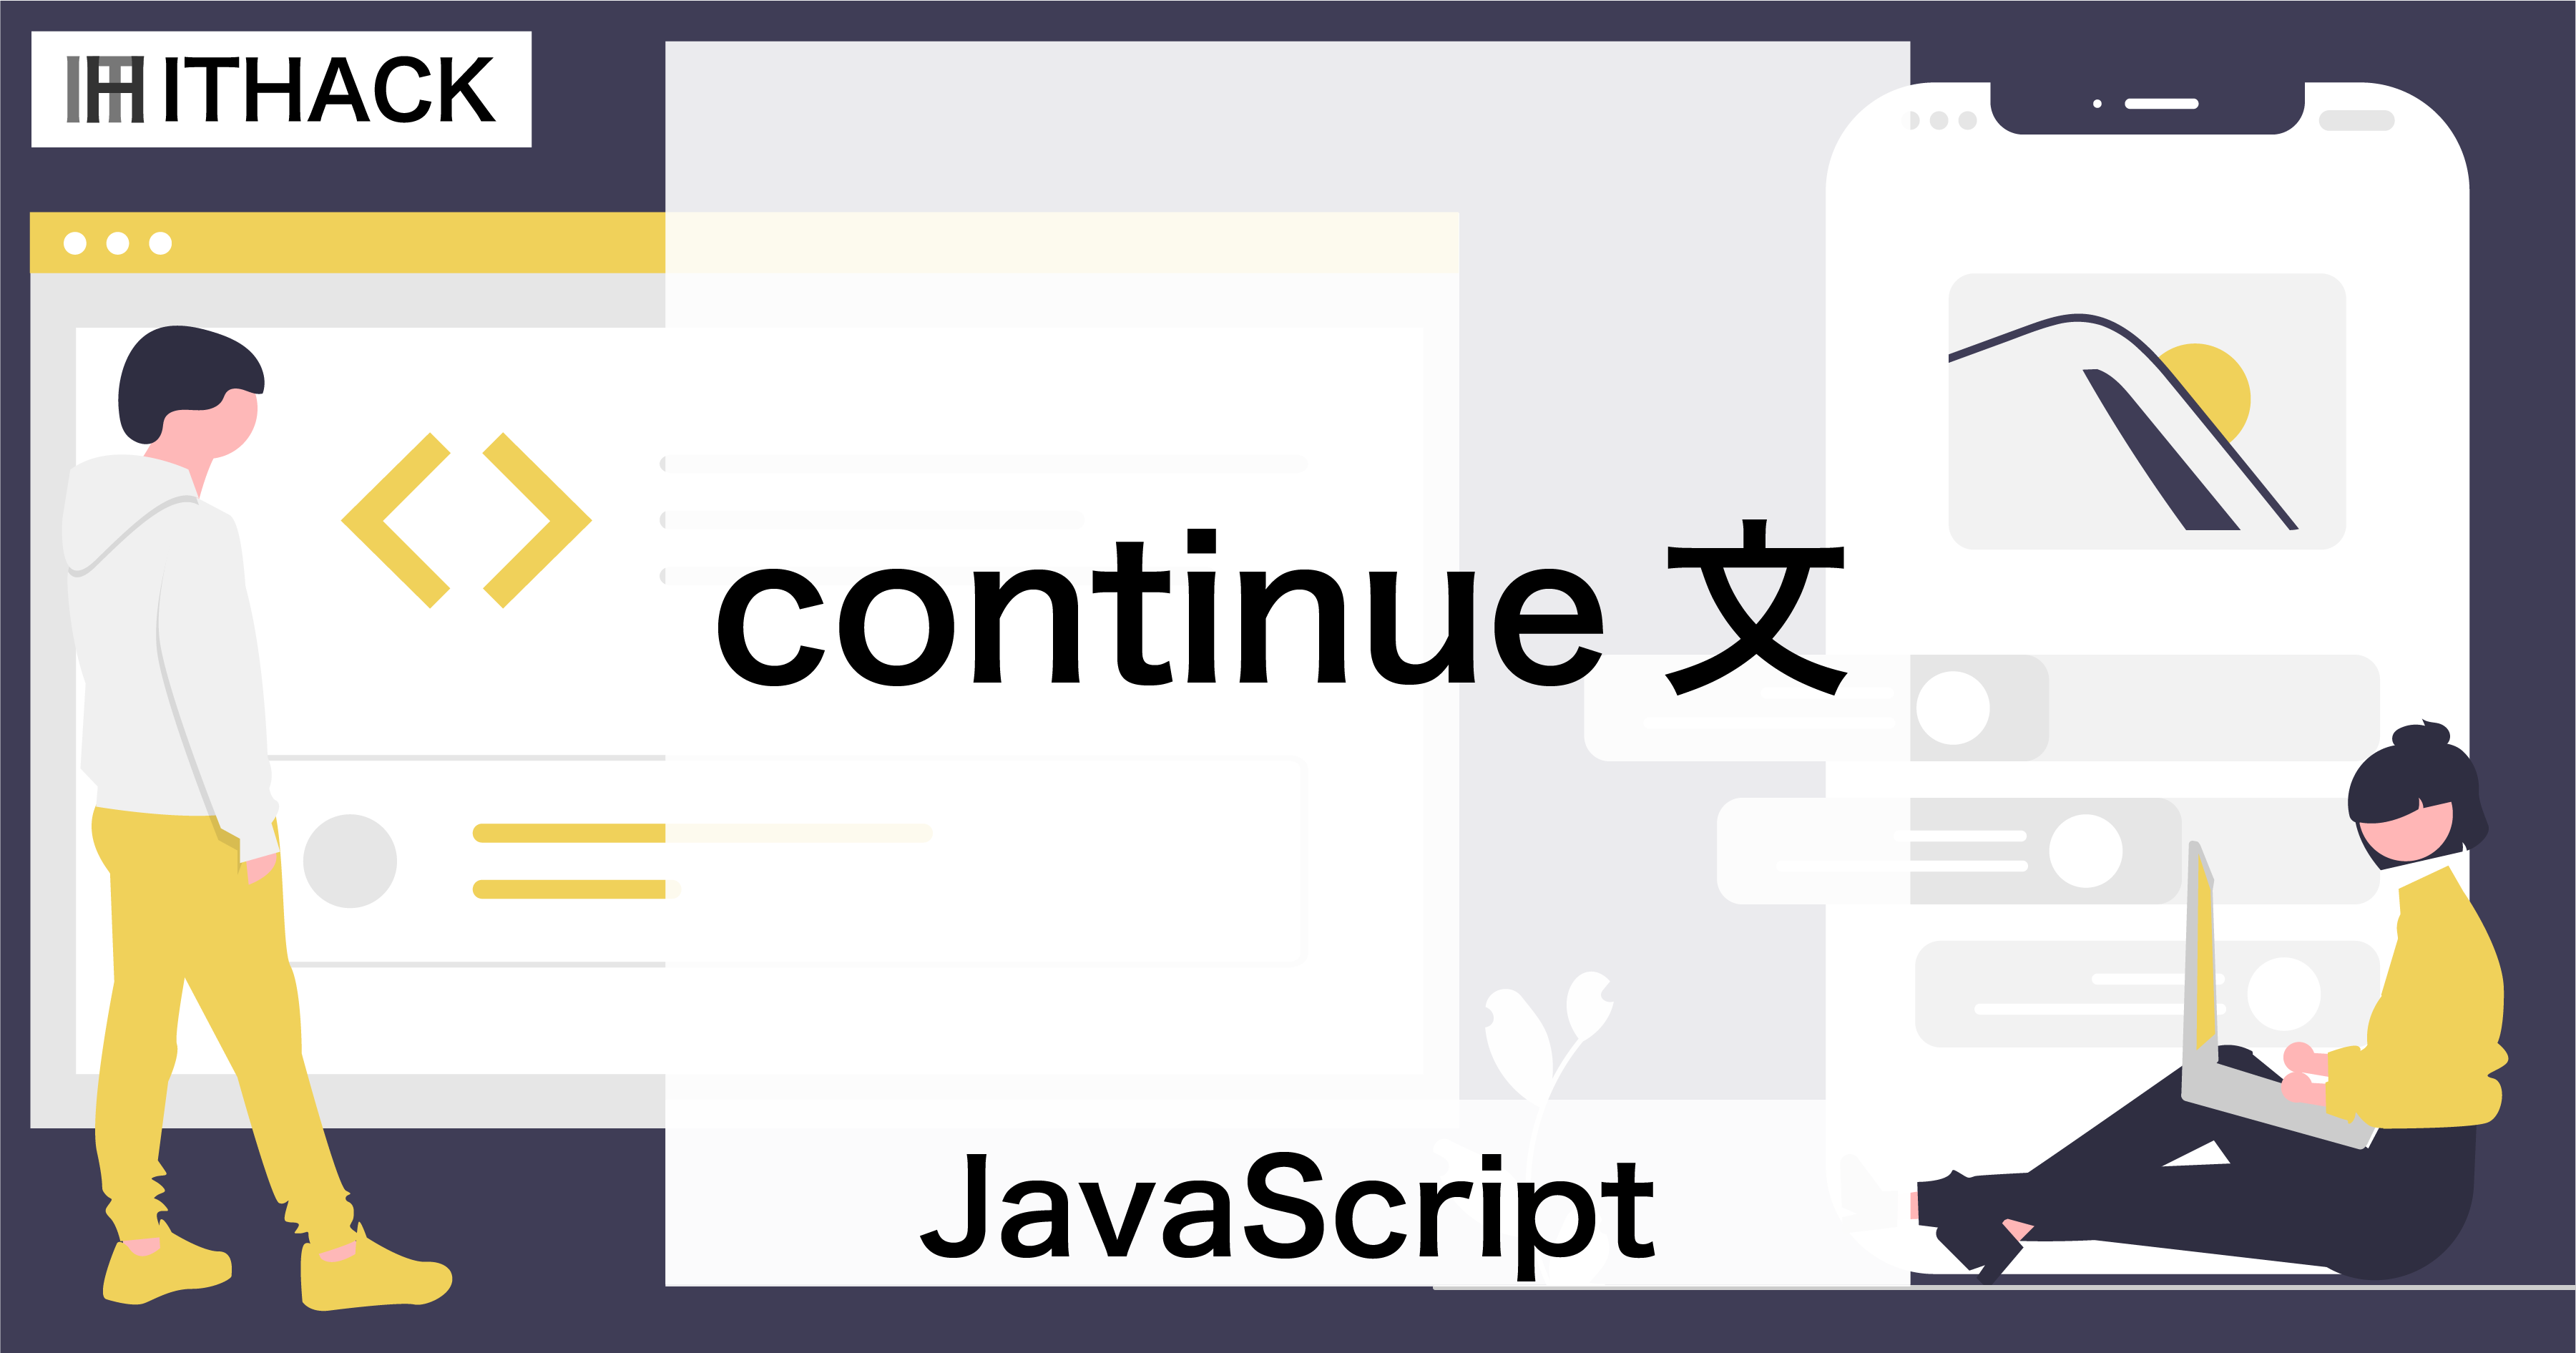 【JavaScript】continue文 - 繰り返し処理のスキップ（for/for-of/for-in/while/do-while)